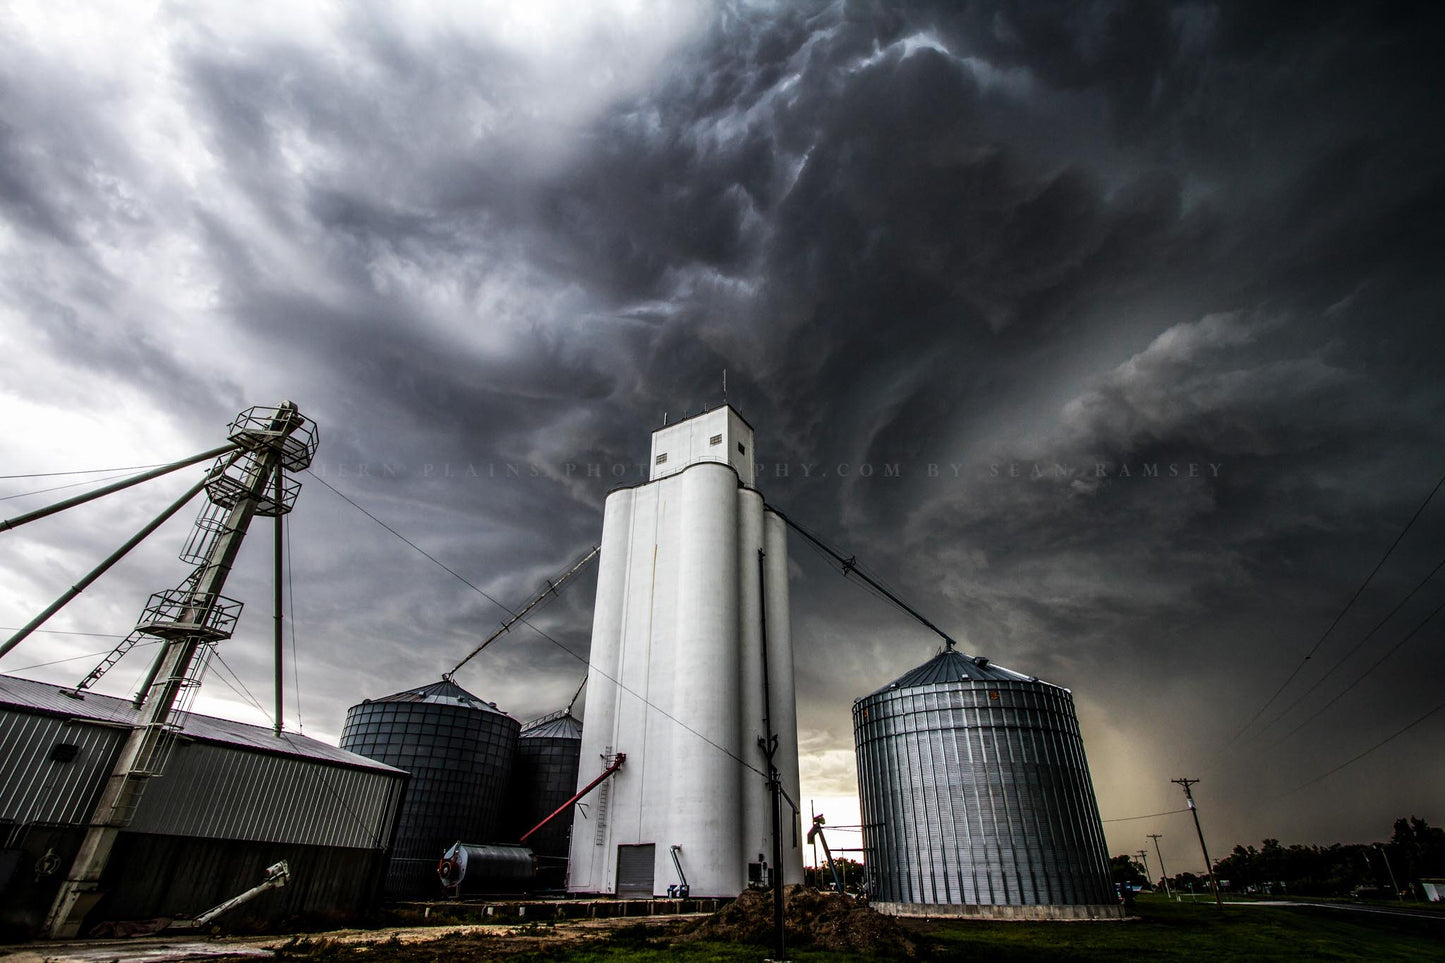 Rural photography print of storm clouds swirling over a grain elevator on a stormy spring day in a small town in Kansas by Sean Ramsey of Southern Plains Photography.